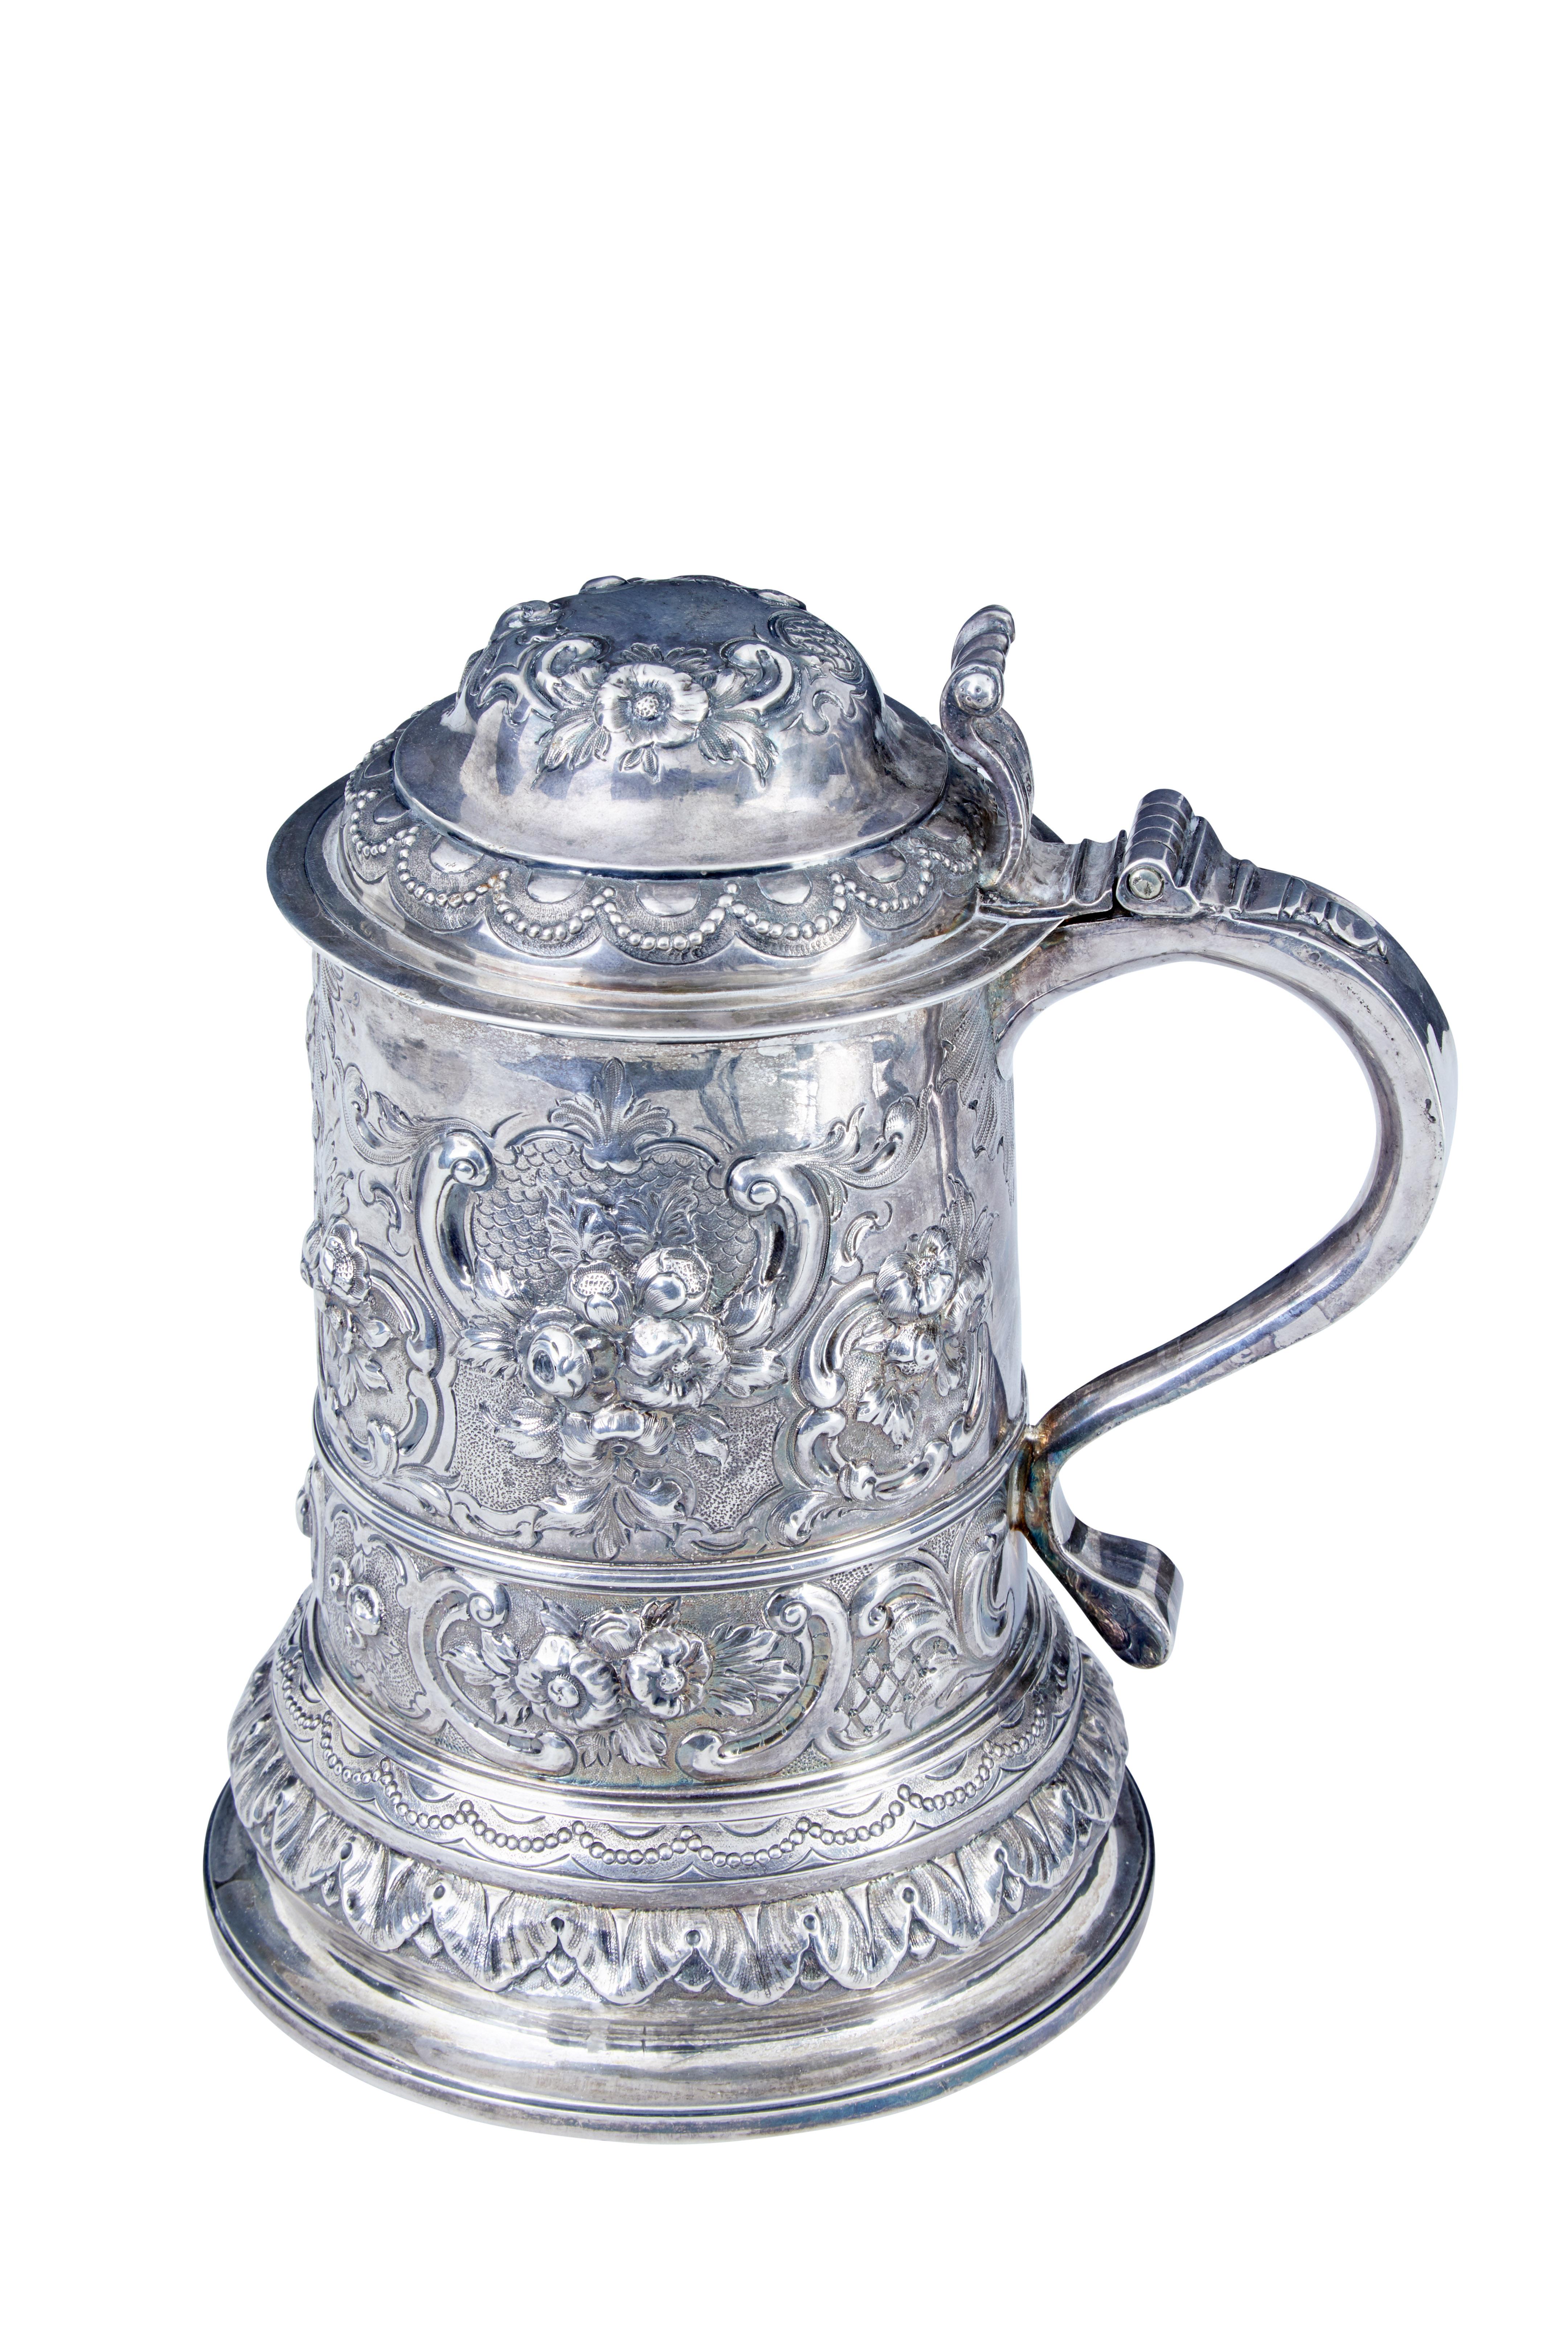 John Penfold (aka penford) makers mark rococo silver lidded tankard, circa 1723.

Here we have a beautiful silver lidded tankard in the rococo style. The interior is gilded and

Overall condition is good.

The tankard bears exterior and